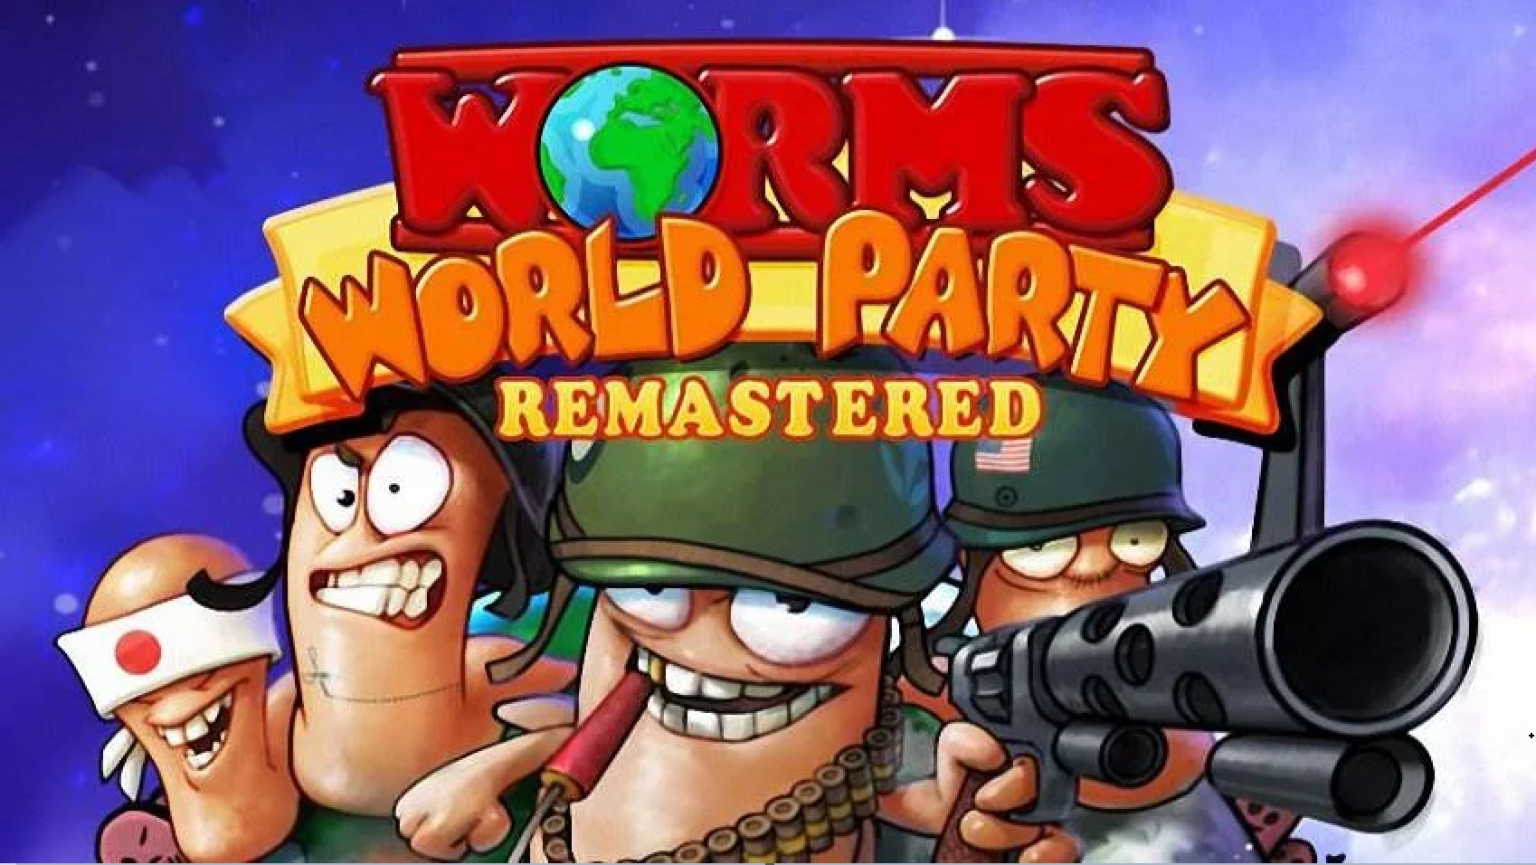 Worms игра. Worms Armageddon Remastered. Worms World Party. Worms ворлд пати Ремастеред.